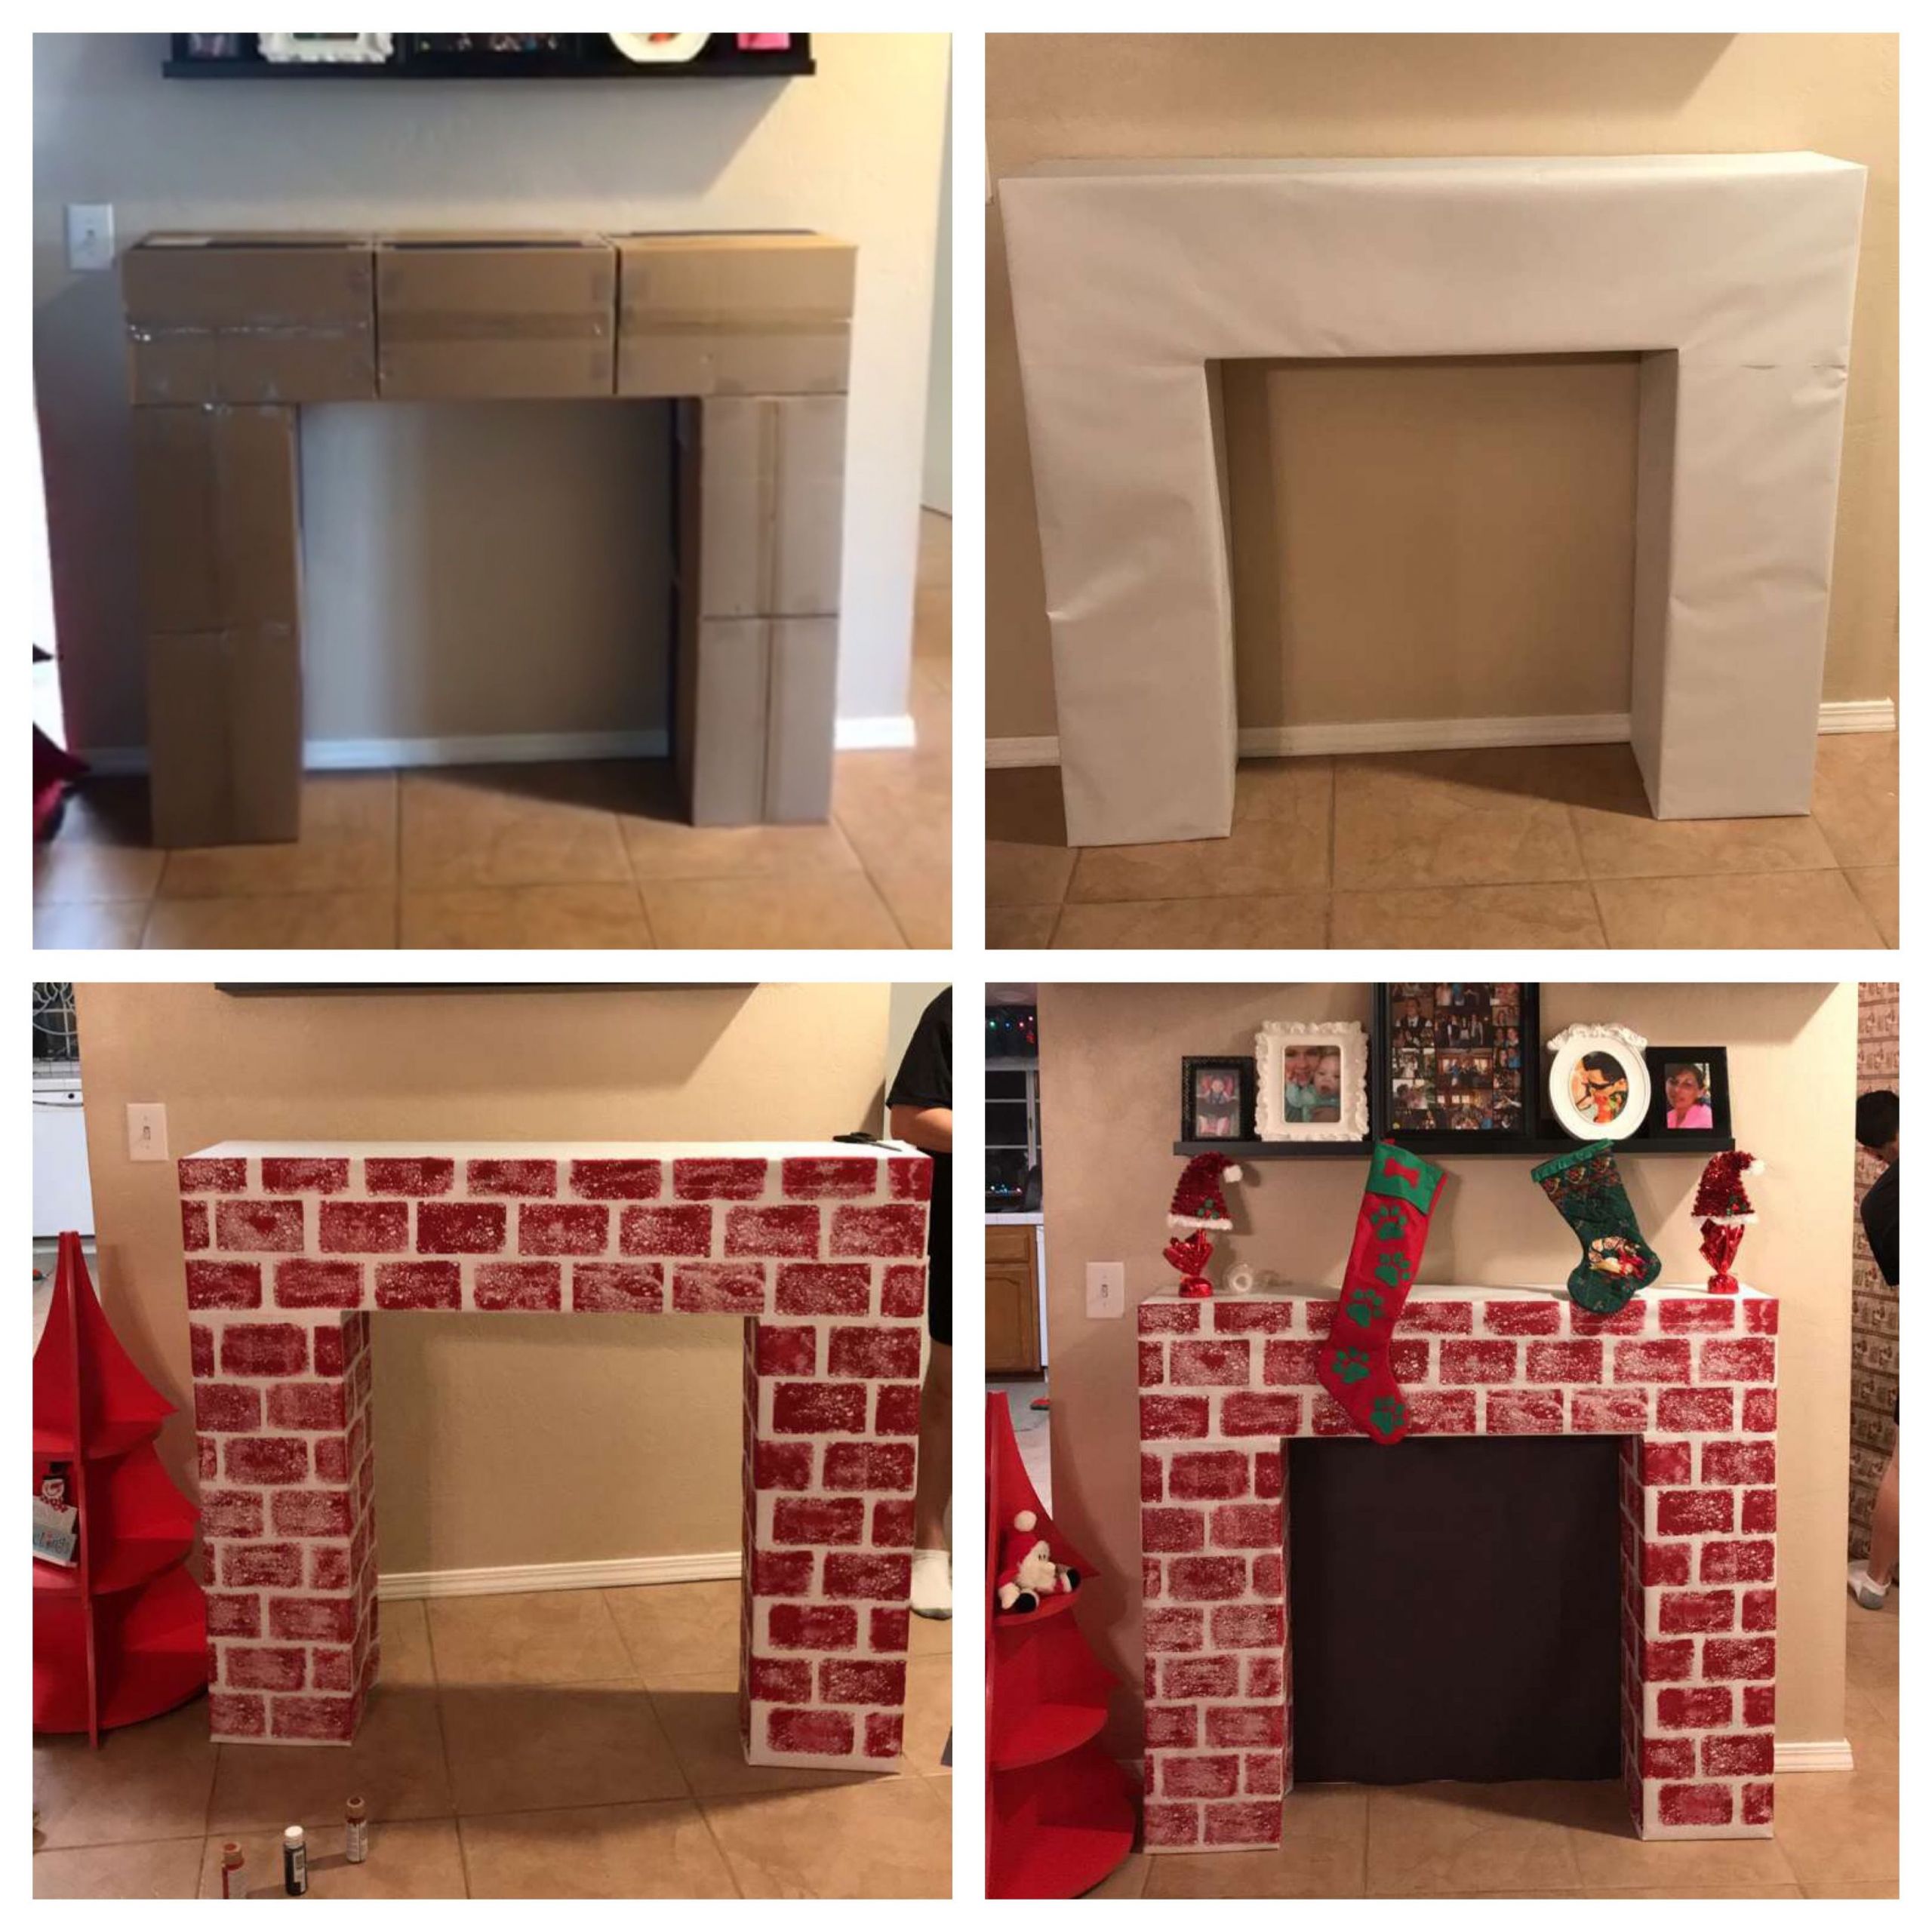 DIY Christmas Fireplace
 DIY fireplace made out of cardboard boxes and painted